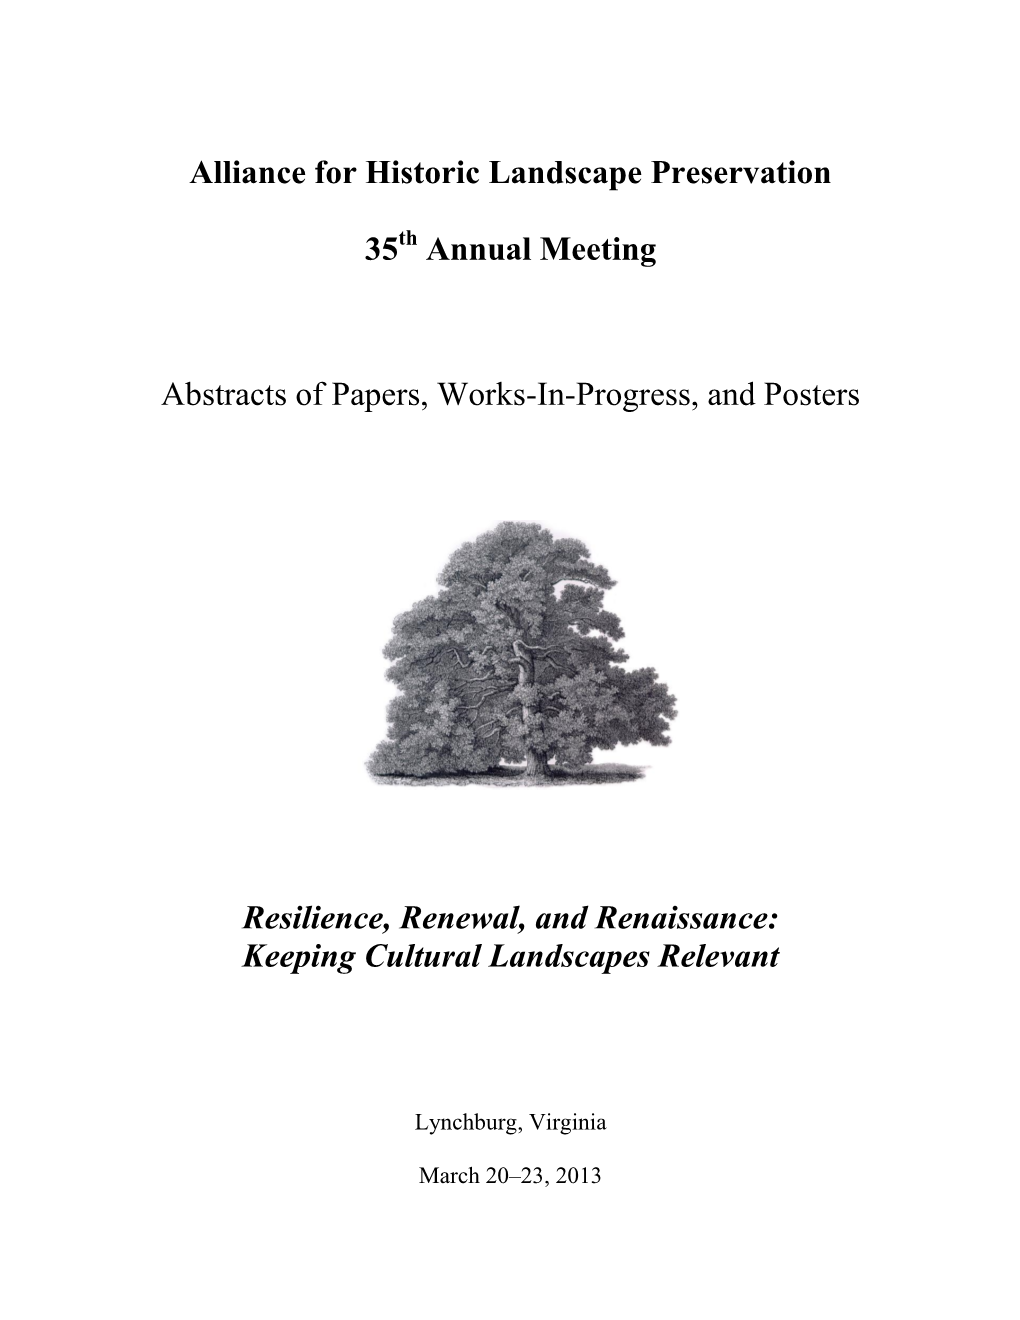 Alliance for Historic Landscape Preservation 35 Annual Meeting